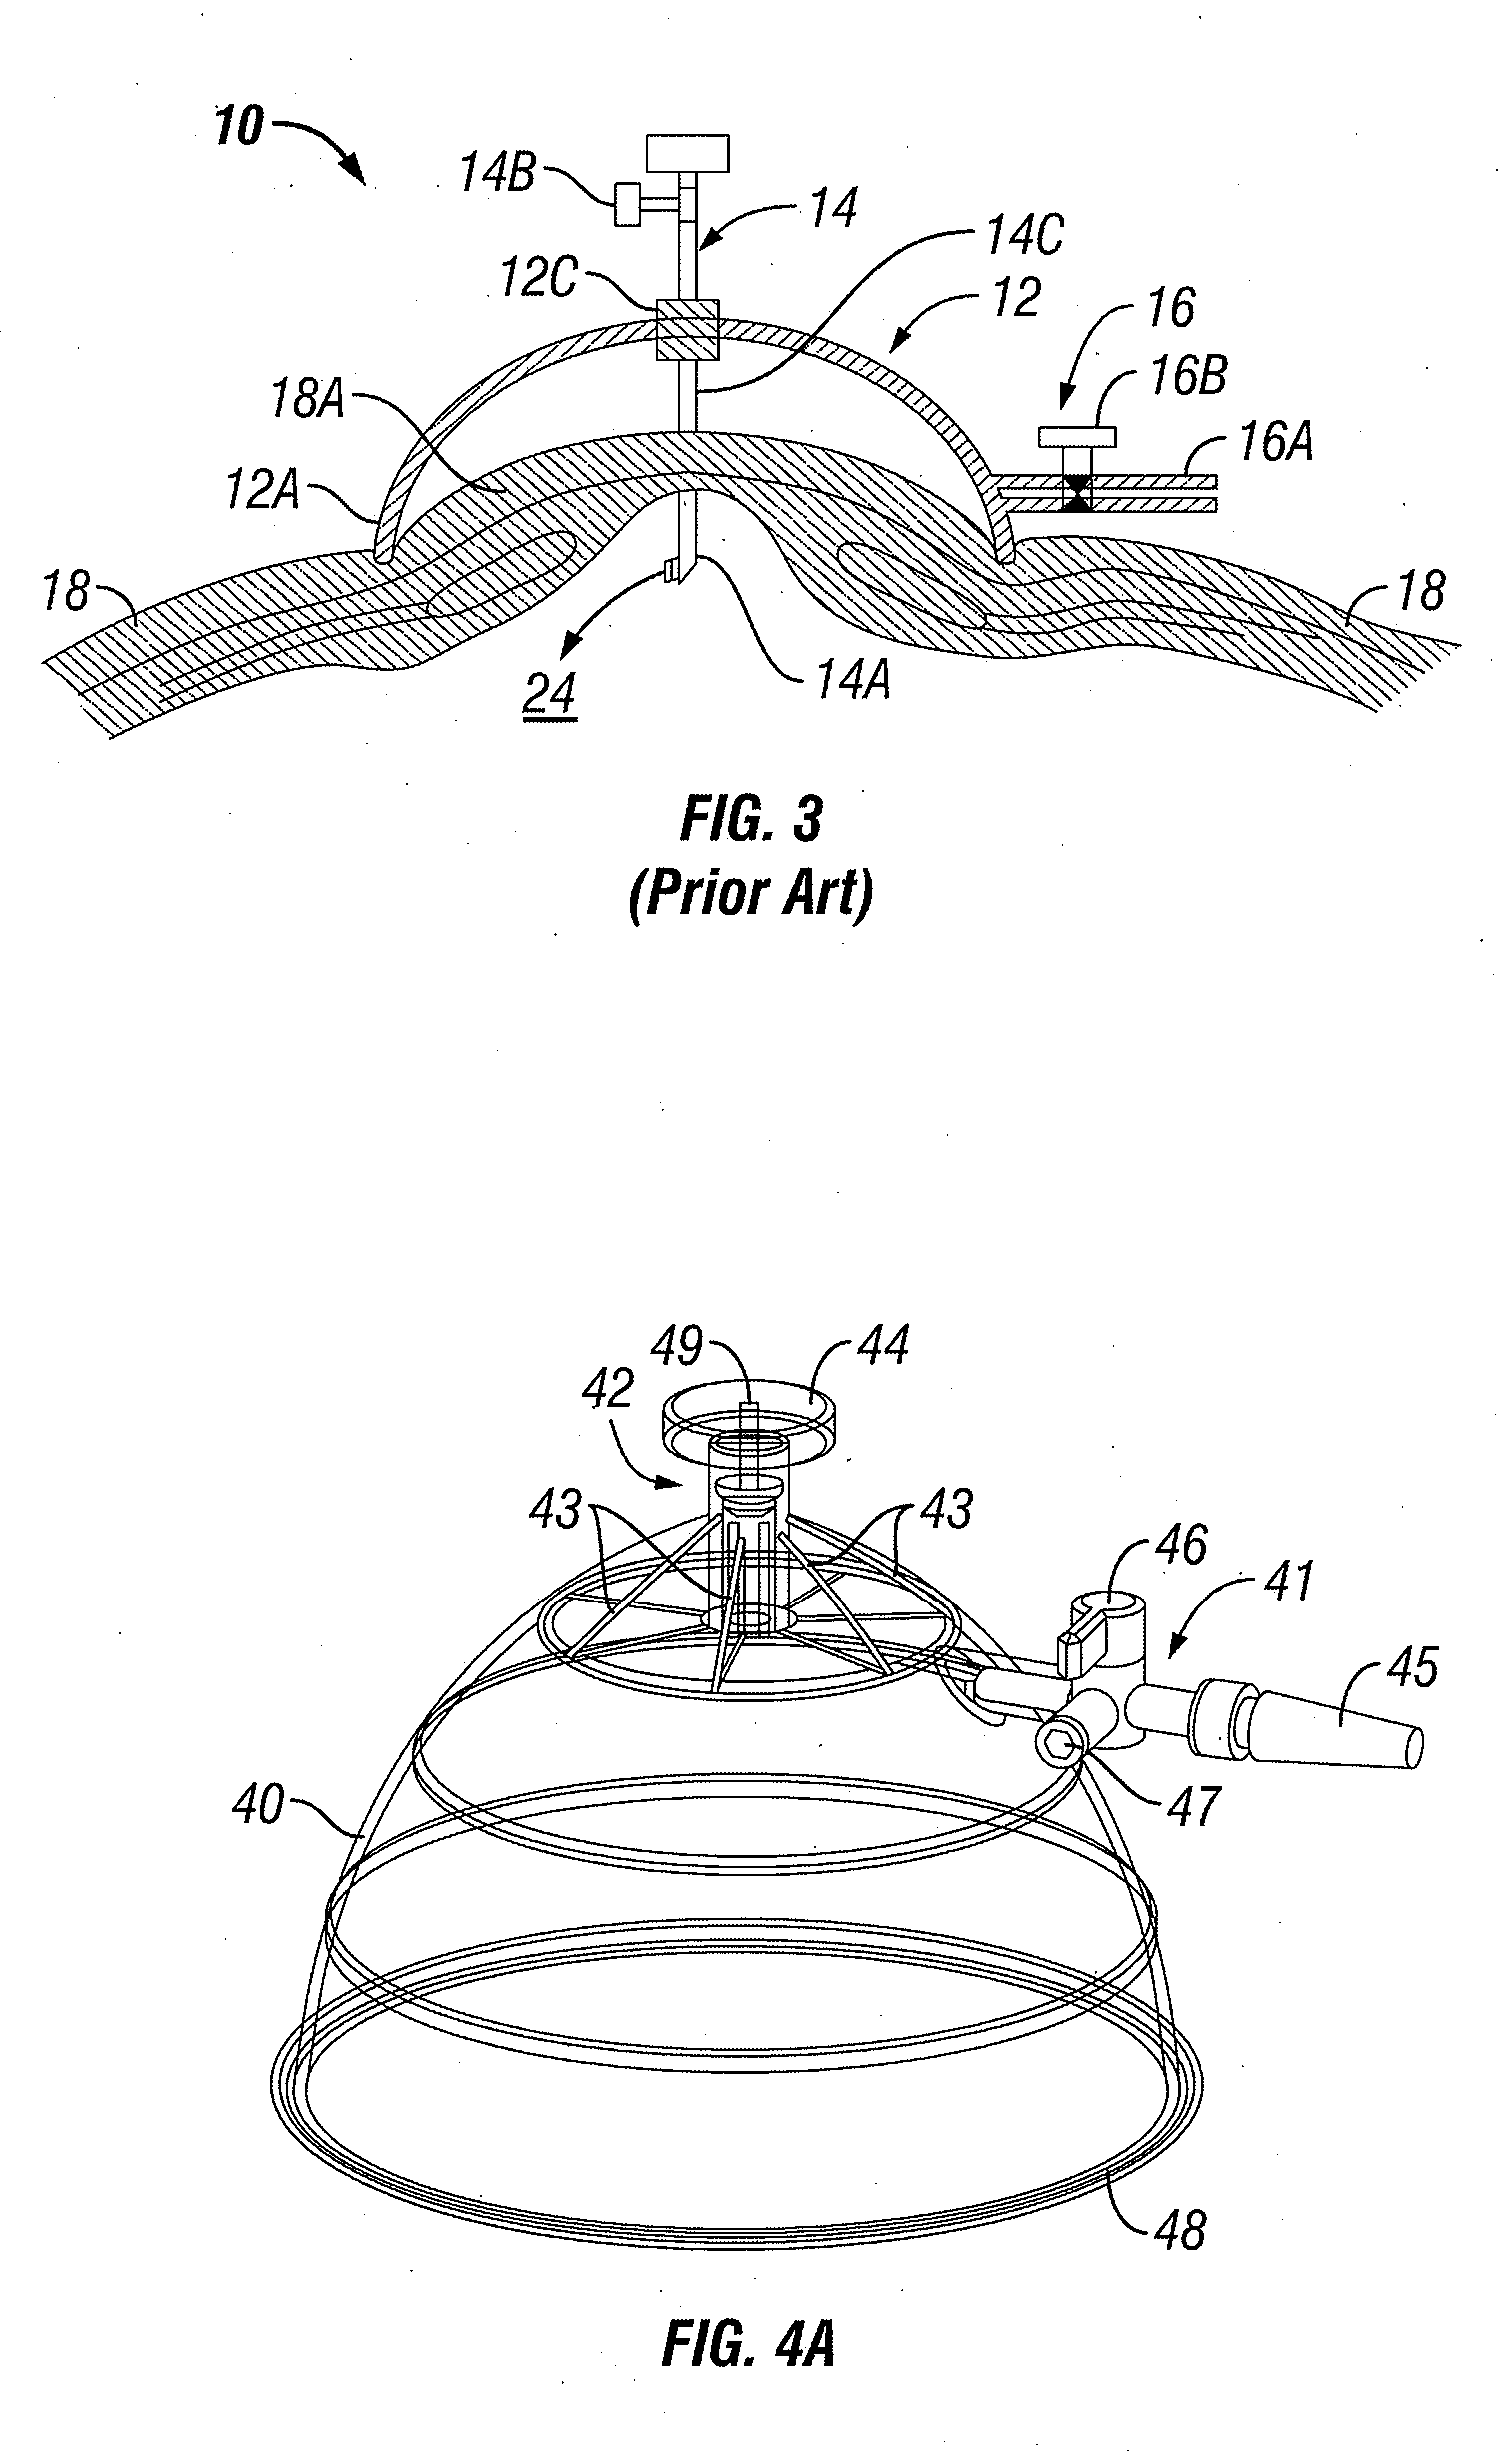 Method and Apparatus for Assisting in the Introduction of Surgical Implements into a Body